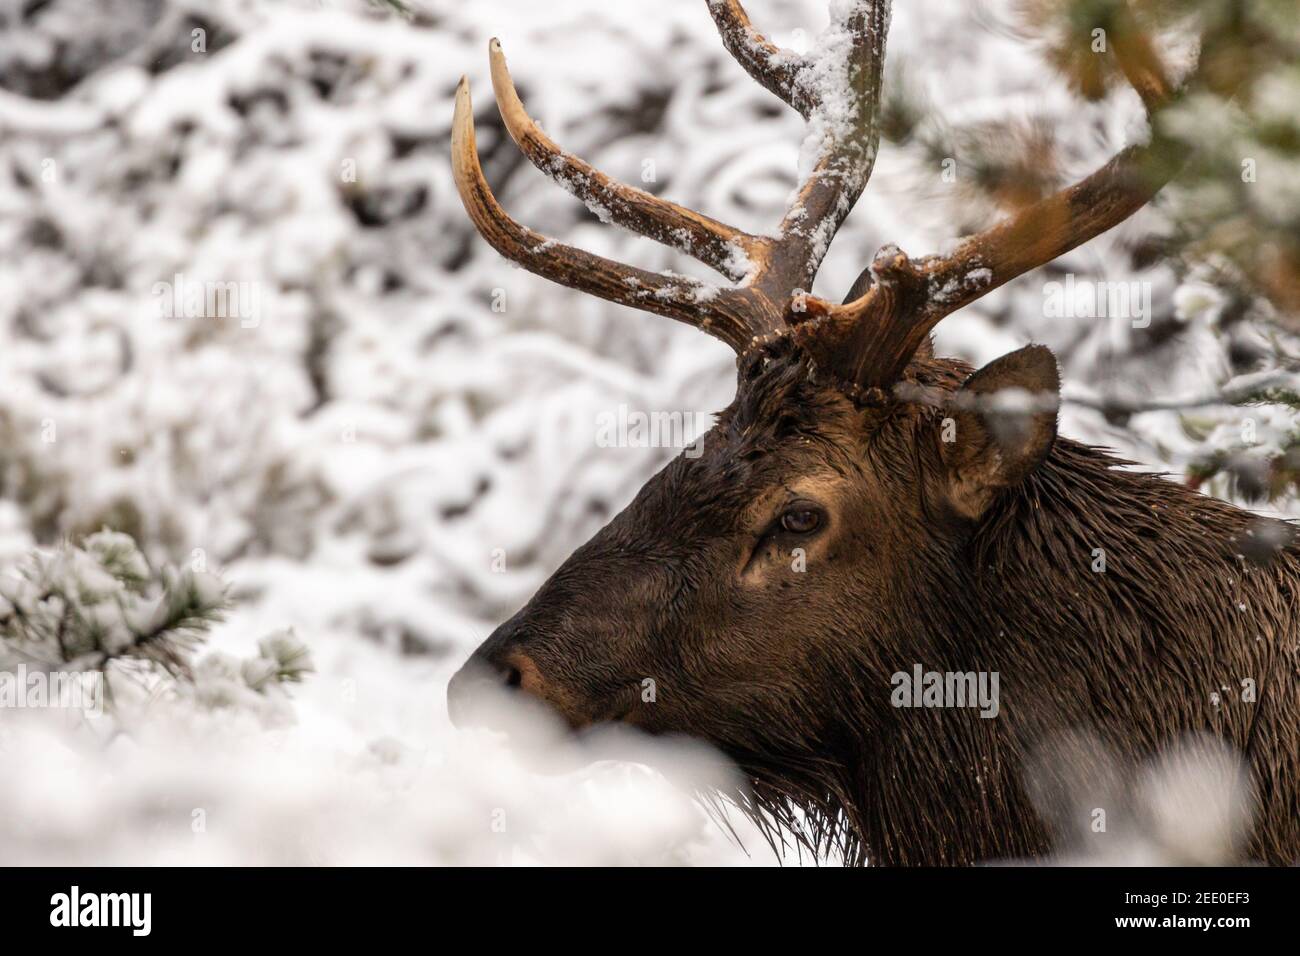 Big Bull in snow covered trees, close up portrait. Stock Photo